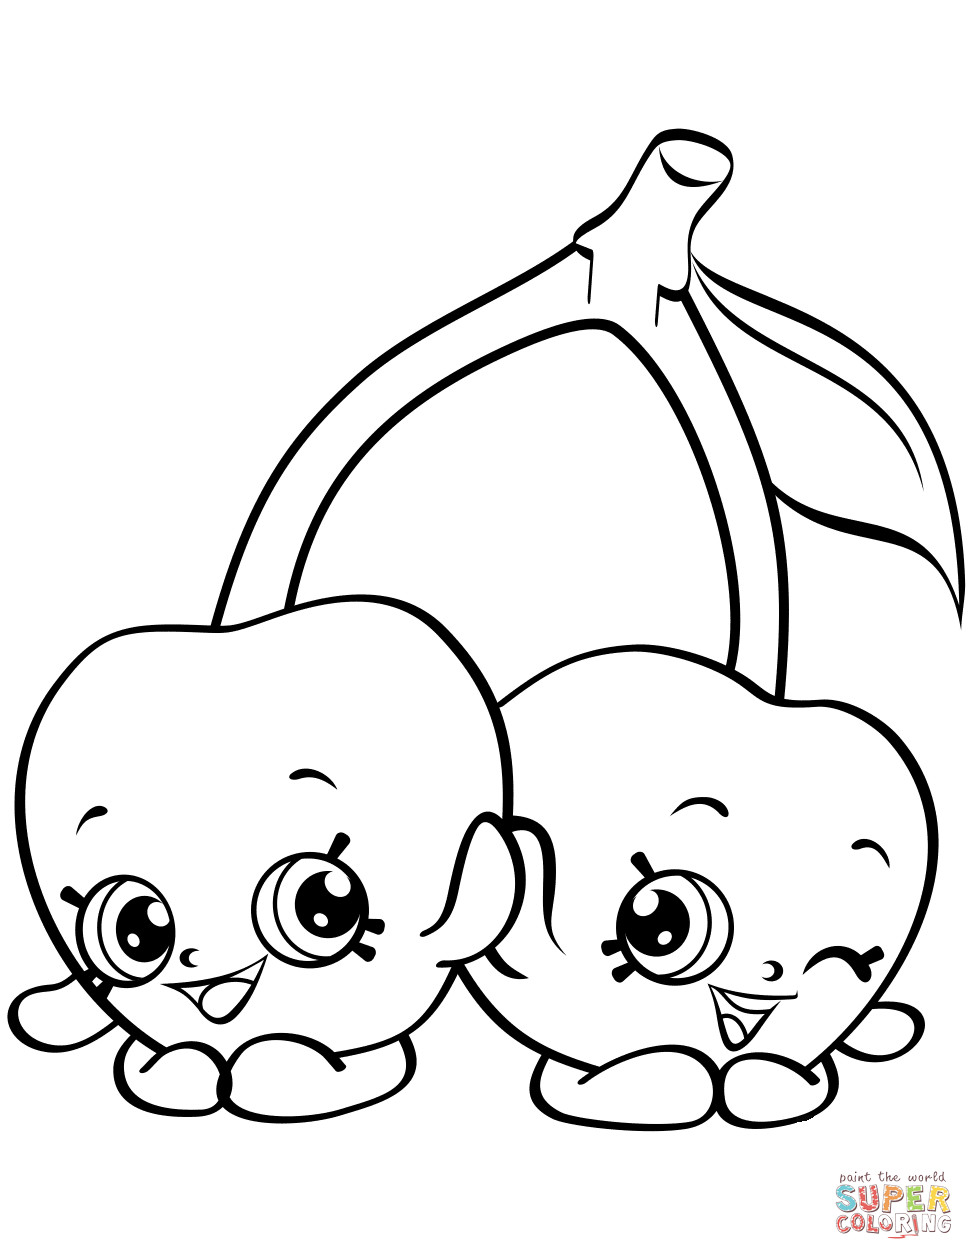 Printable Shopkin Coloring Pages
 Cheeky Cherries Shopkin coloring page